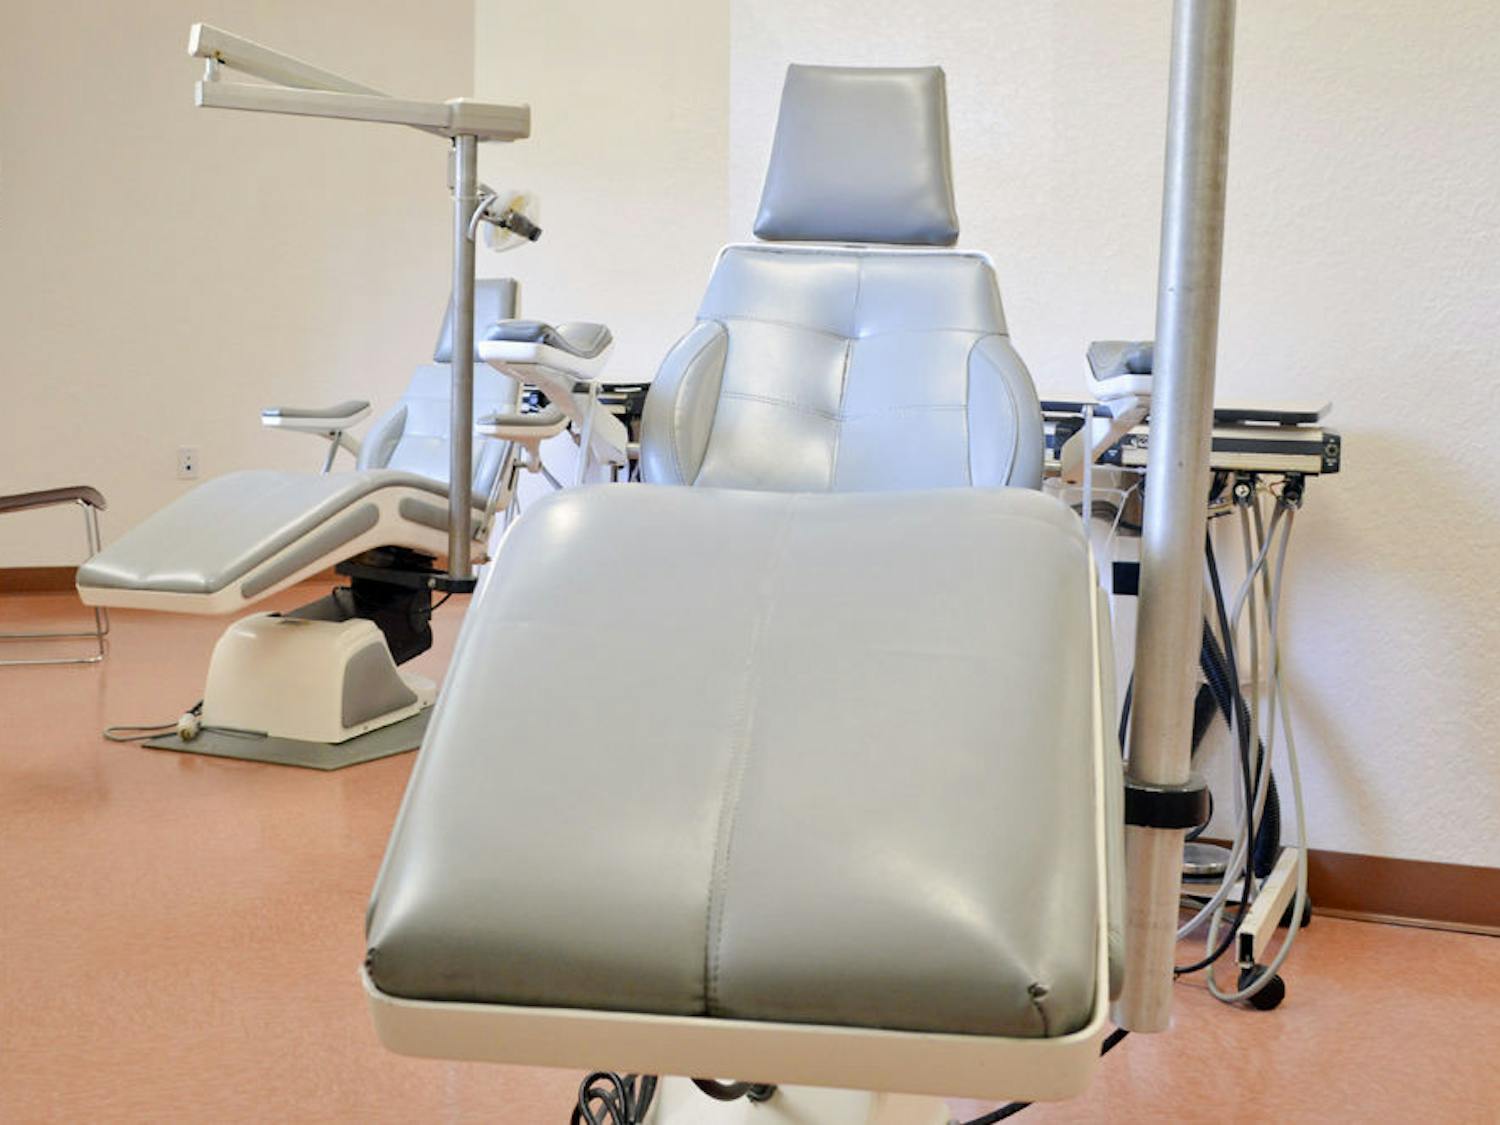 Pictured is one of four dental chairs in the Southwest Health Clinic. Dental health care is one of the medical services that the Southwest Health clinic will provide when it opens.